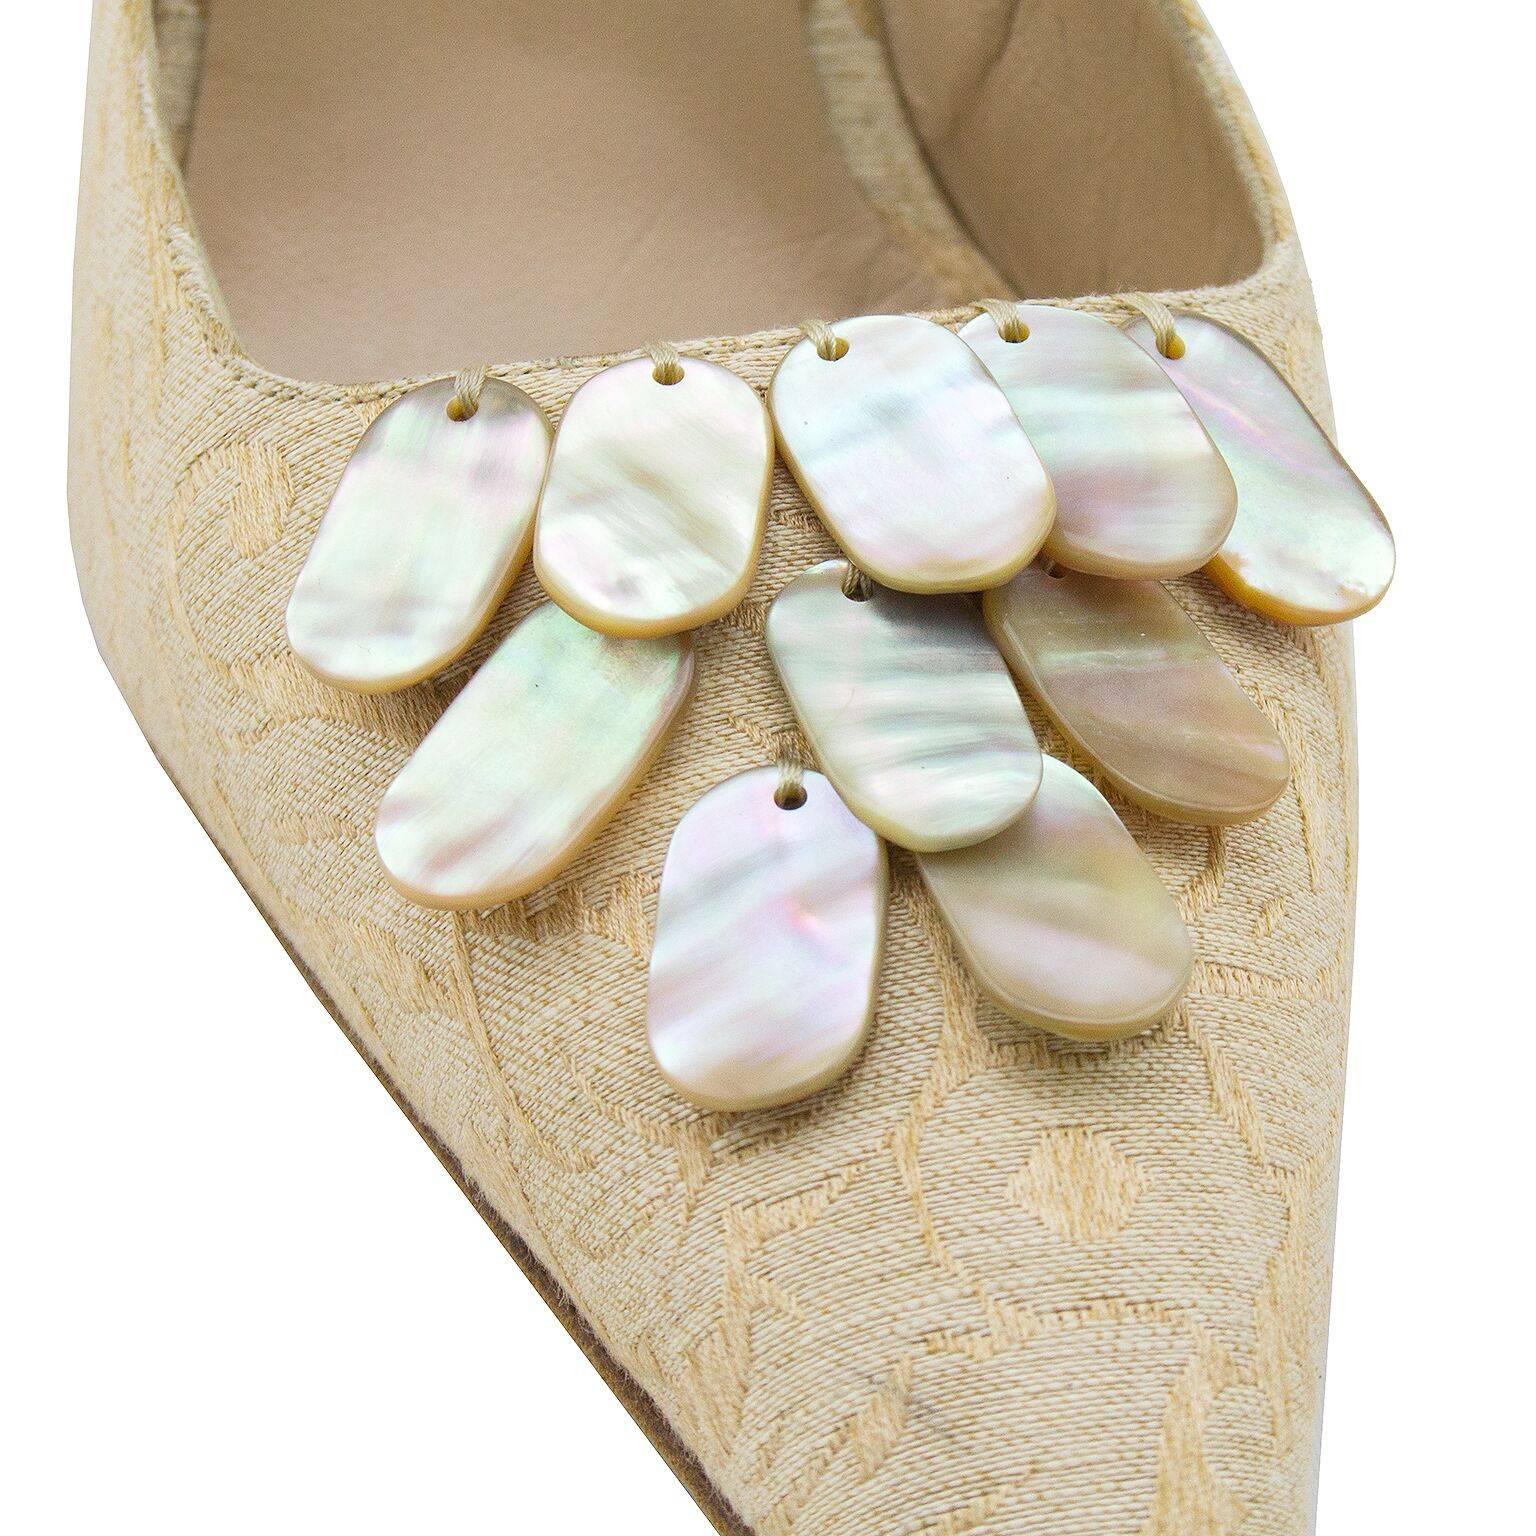 1990s Manolo Blanhik Heels Mules with Mother of Pearl Details